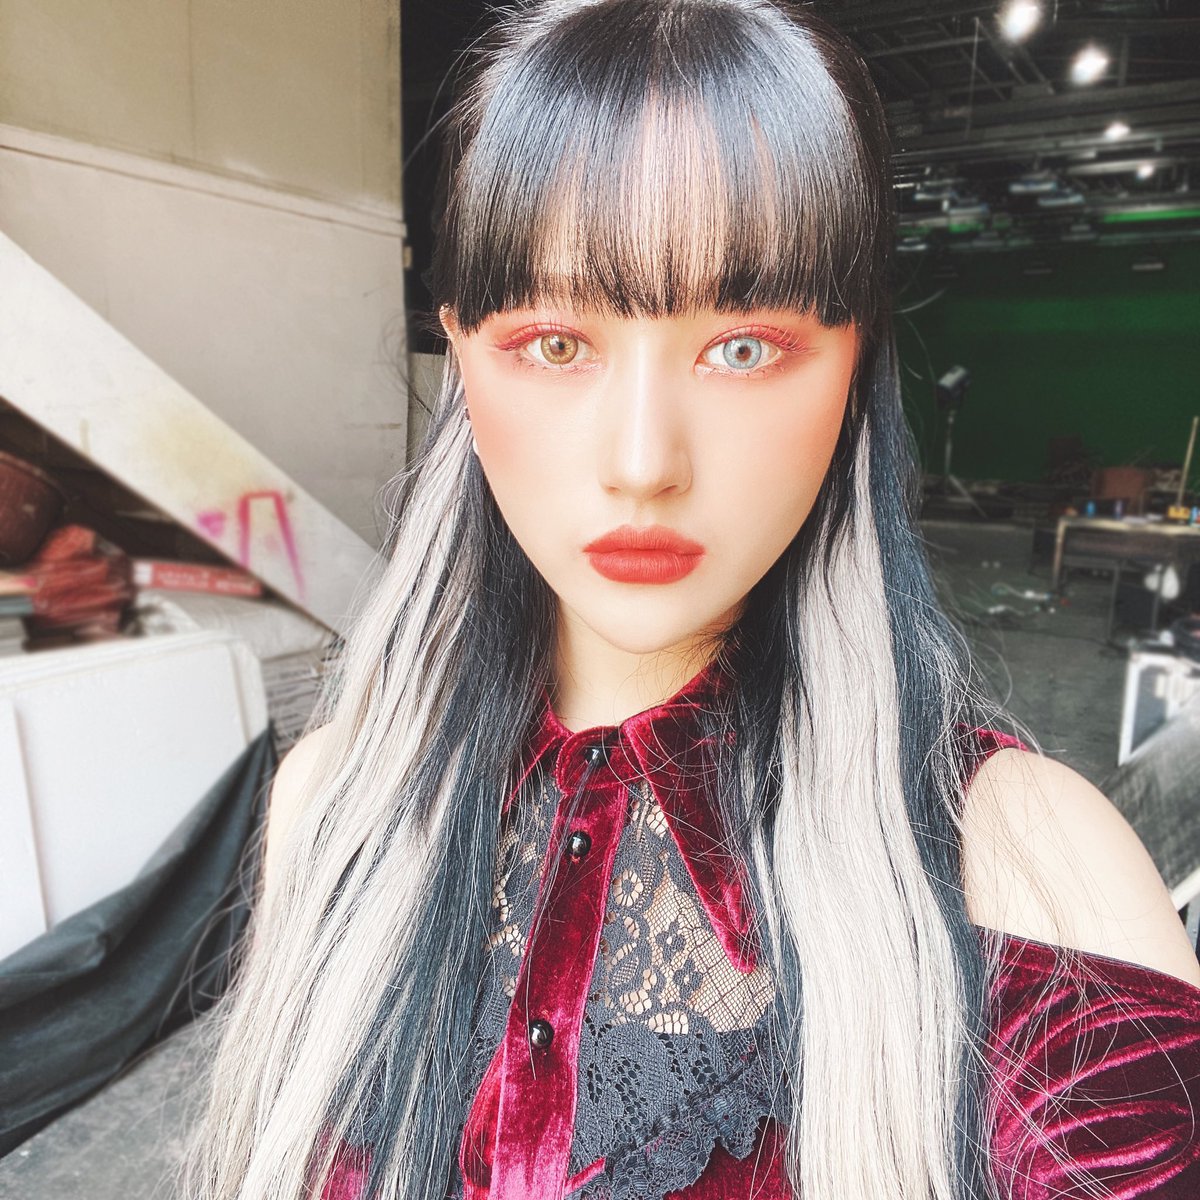 here i'll start with these pictures of heterochromia siyeon because they've been living in my thoughts for weeks